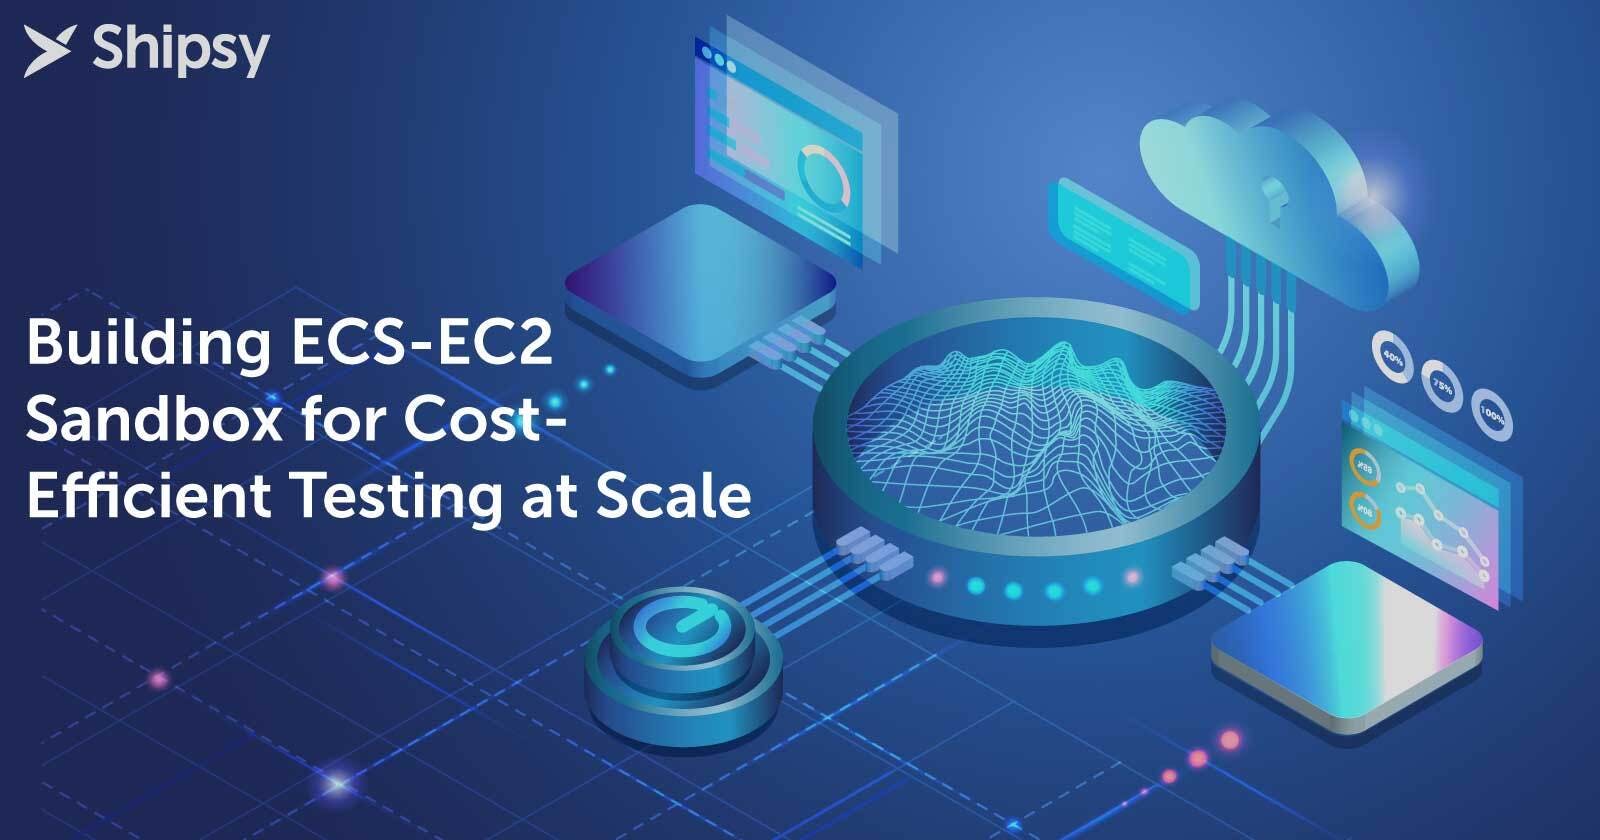 Let’s Play! - Building ECS-EC2 Sandbox for Cost-Efficient Testing at Scale